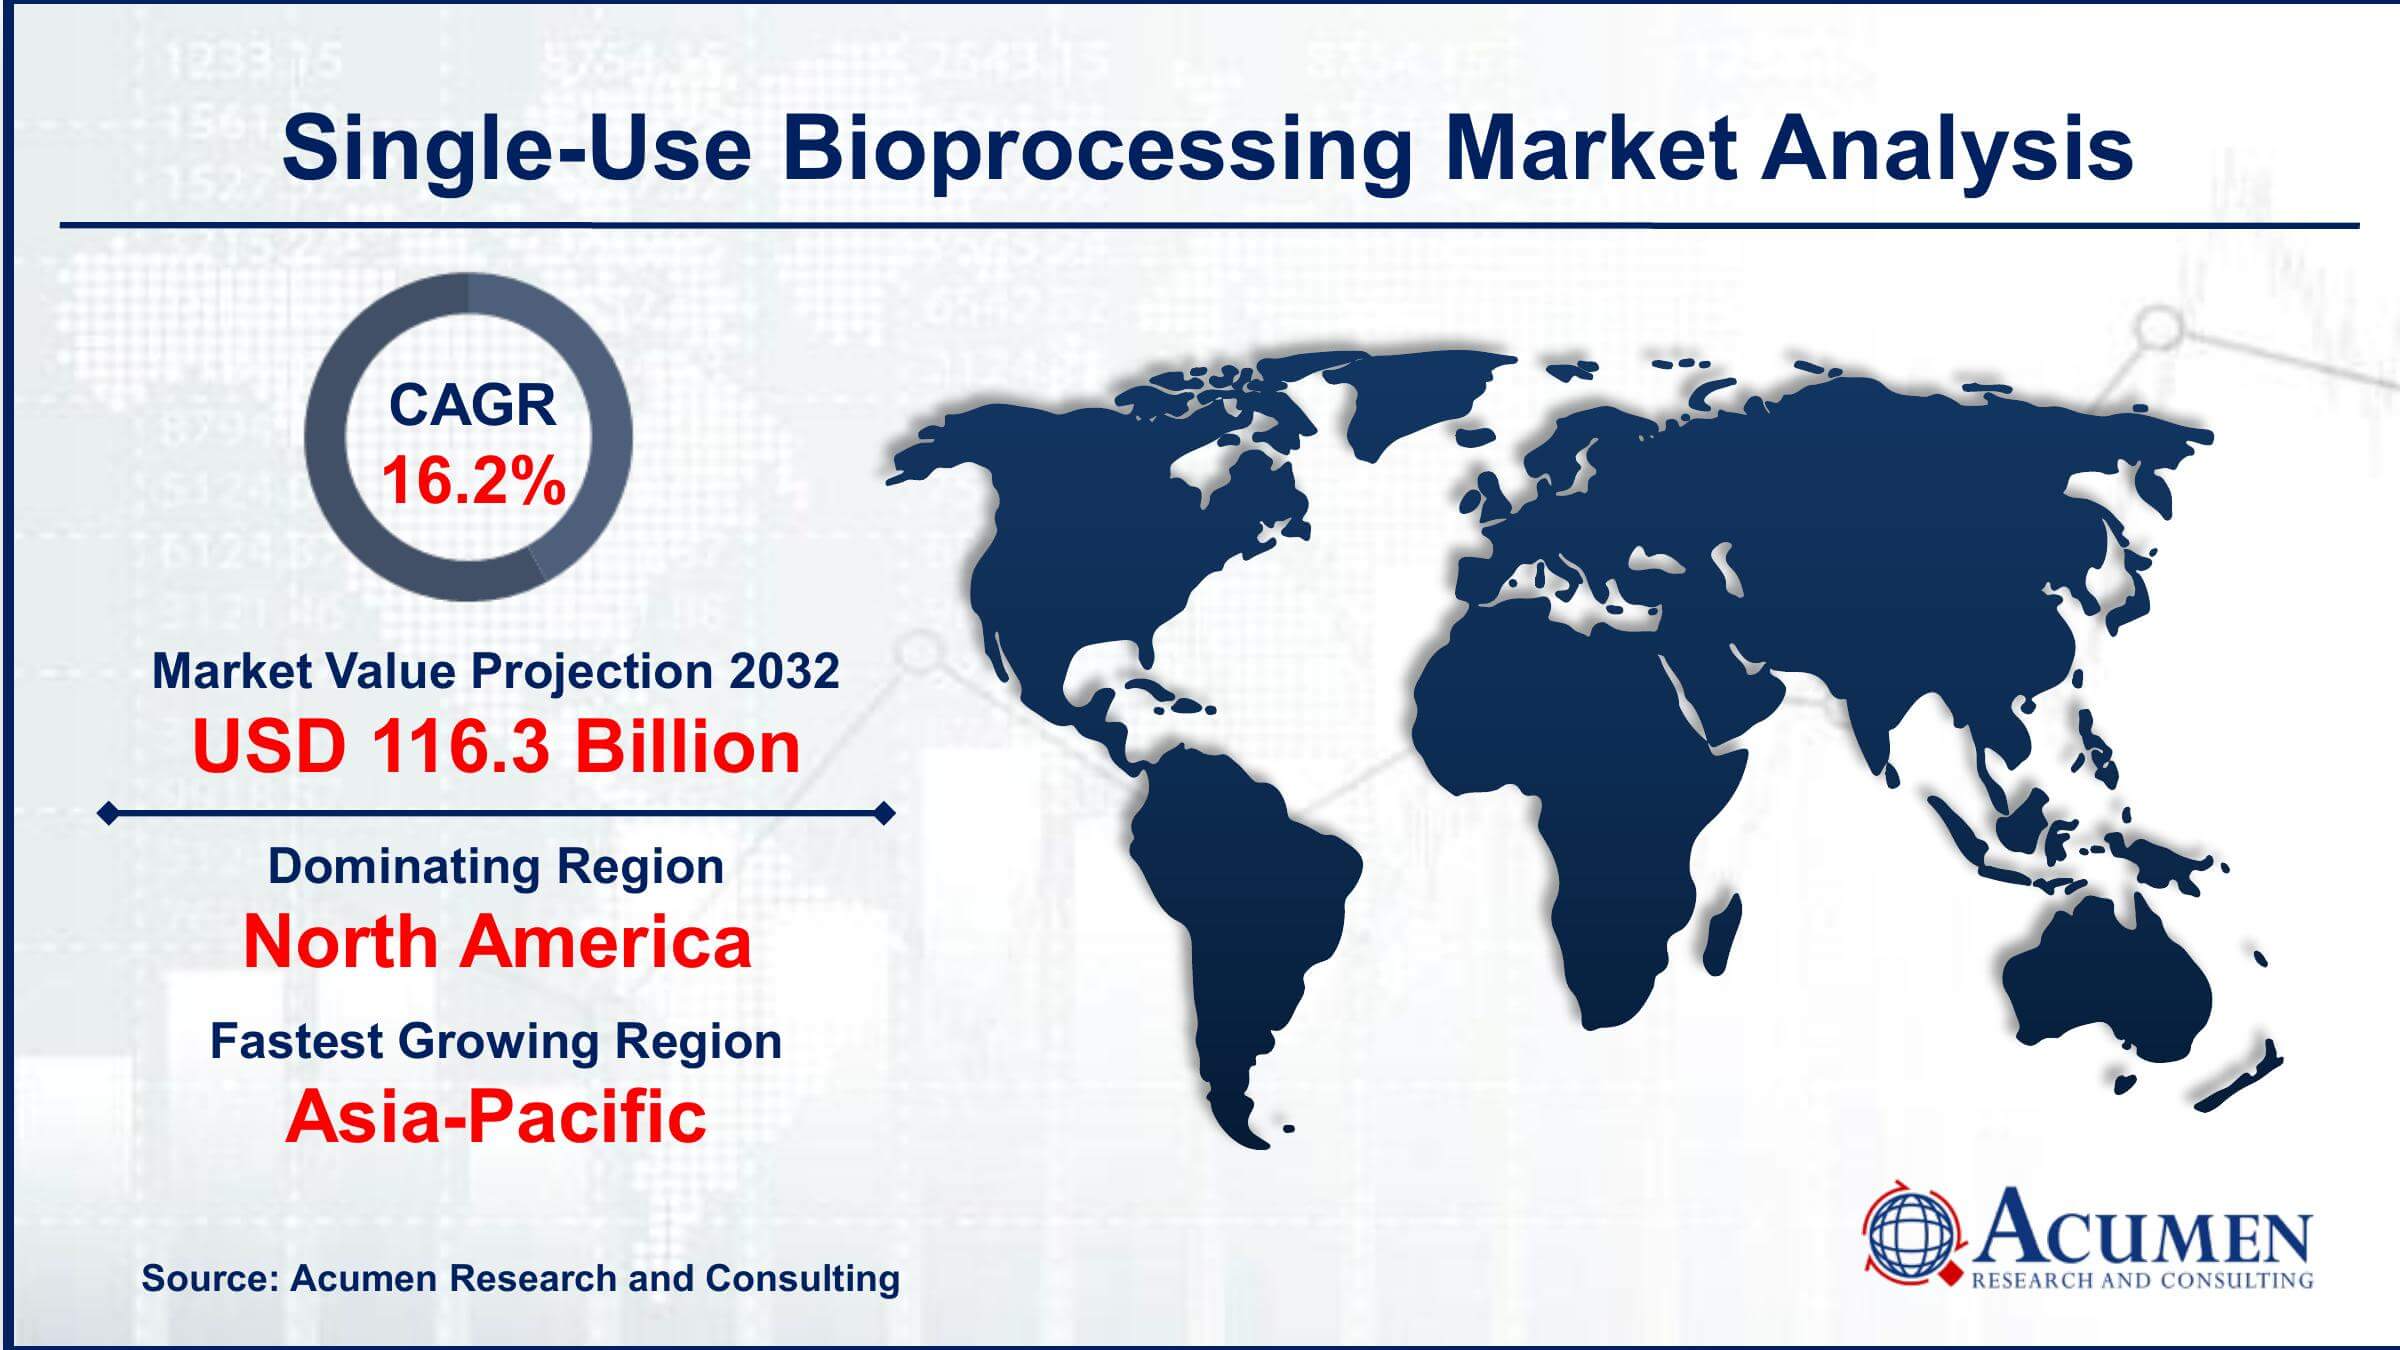 Single-Use Bioprocessing Market Trends